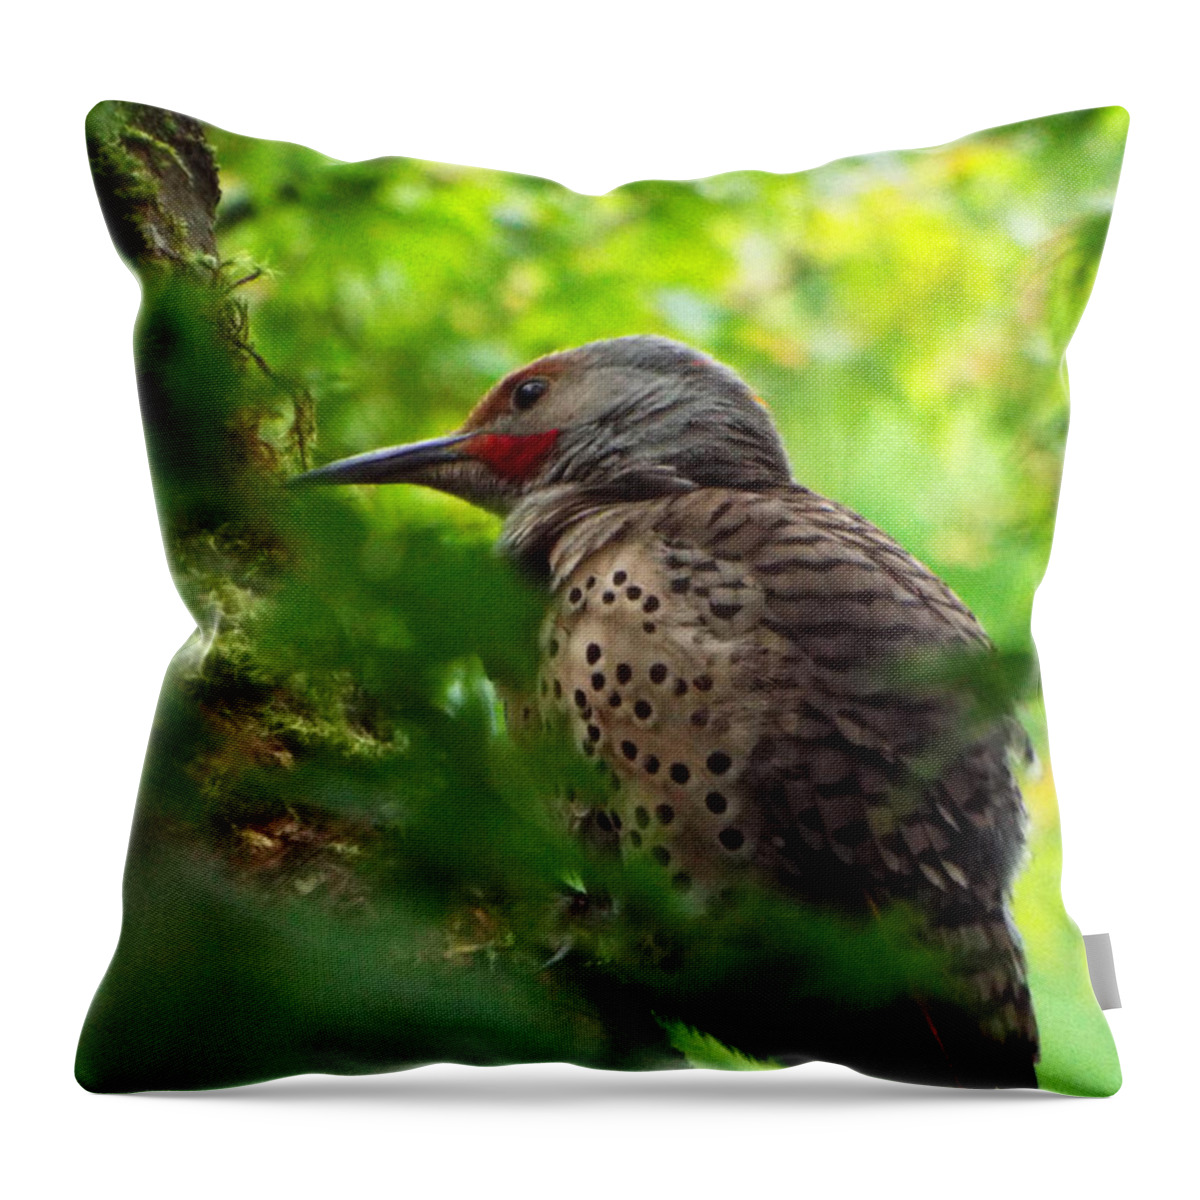 Animals Throw Pillow featuring the photograph Flickers Last Stand by Kym Backland